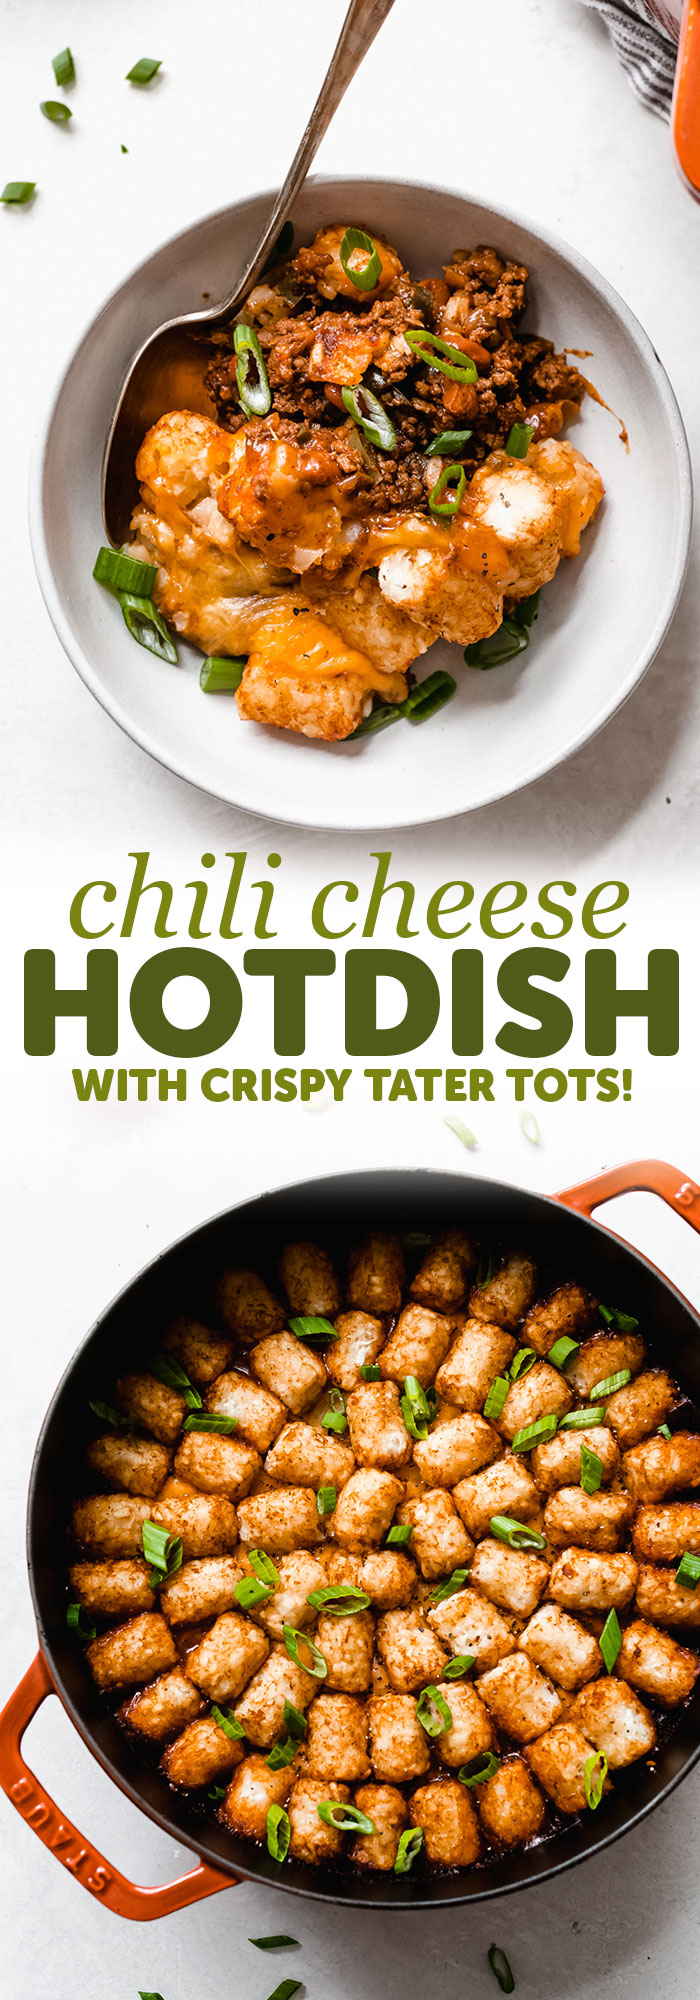 Tater Tot Chili Cheese Hotdish - A homemade chili with beans, topped with shredded cheese and tater tots and it all comes together in ONE pot! #chilicheesehotdish #hotdish #onepotmeals #recipes #dinnerrecipes #easyrecipes | Littlespicejar.com